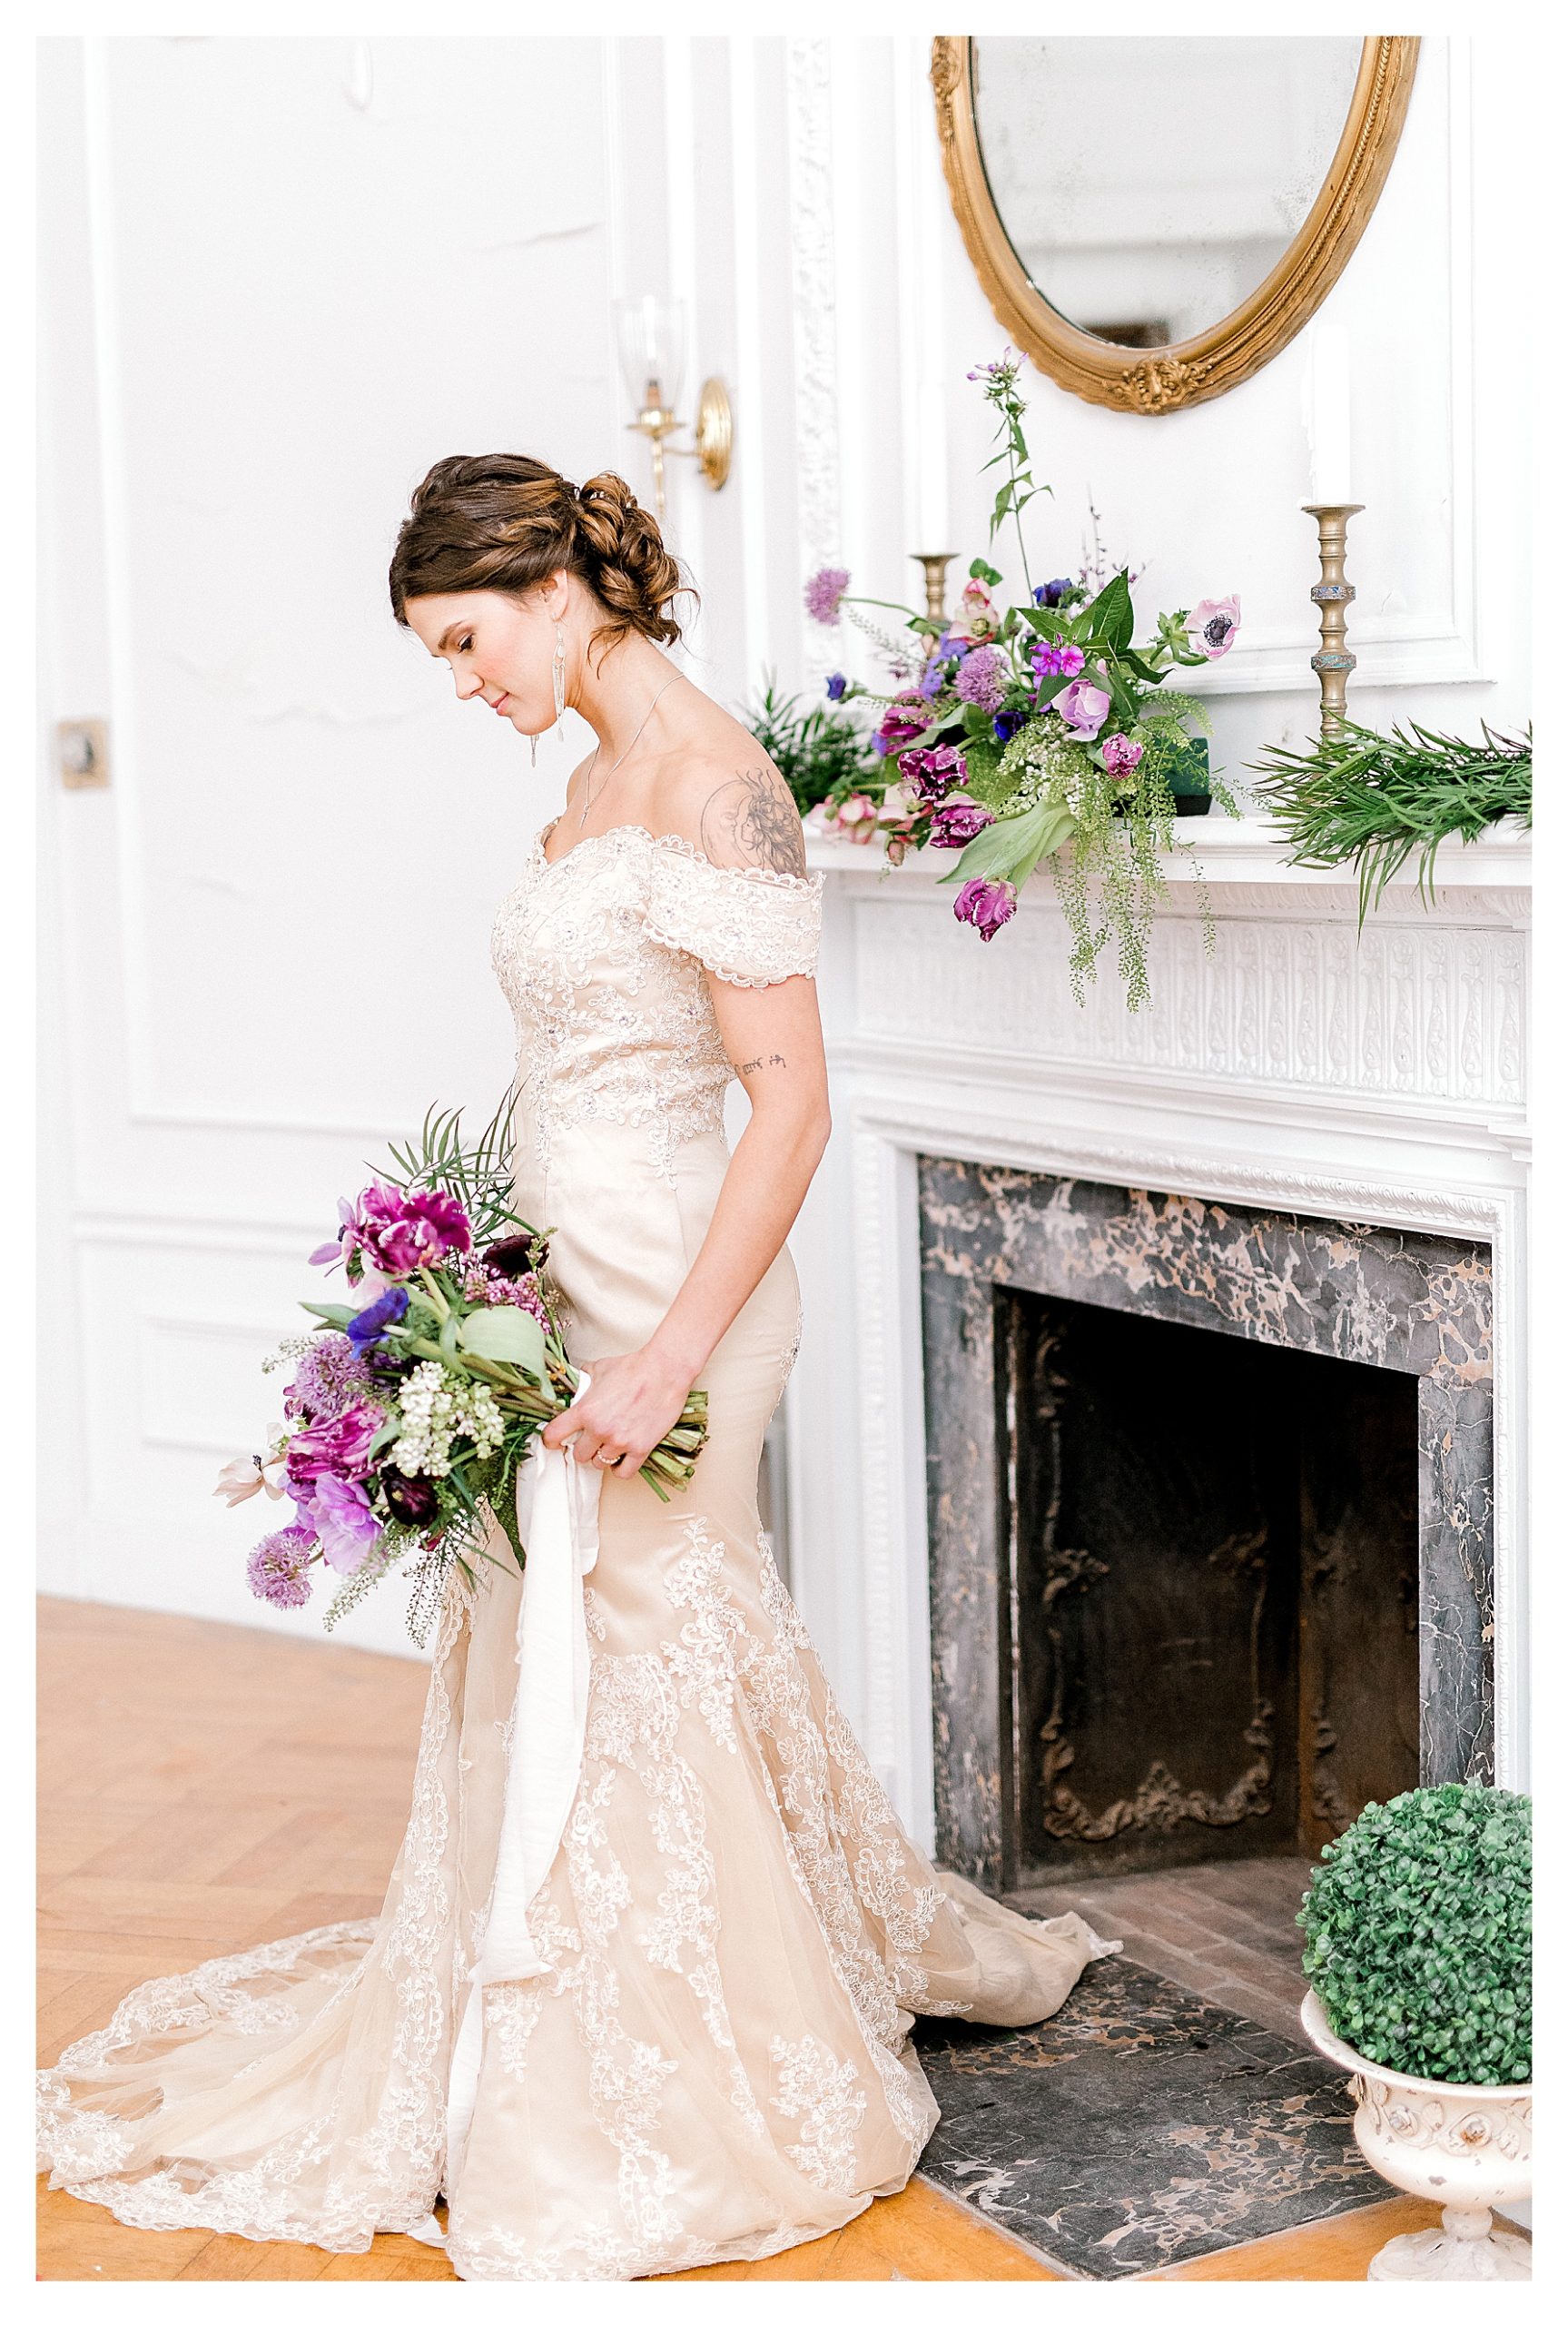 Winter Wedding at Aldworth Manor in Harrisville NH- showing a bride wearing a champagne colored dress standing in front of a fireplace. 